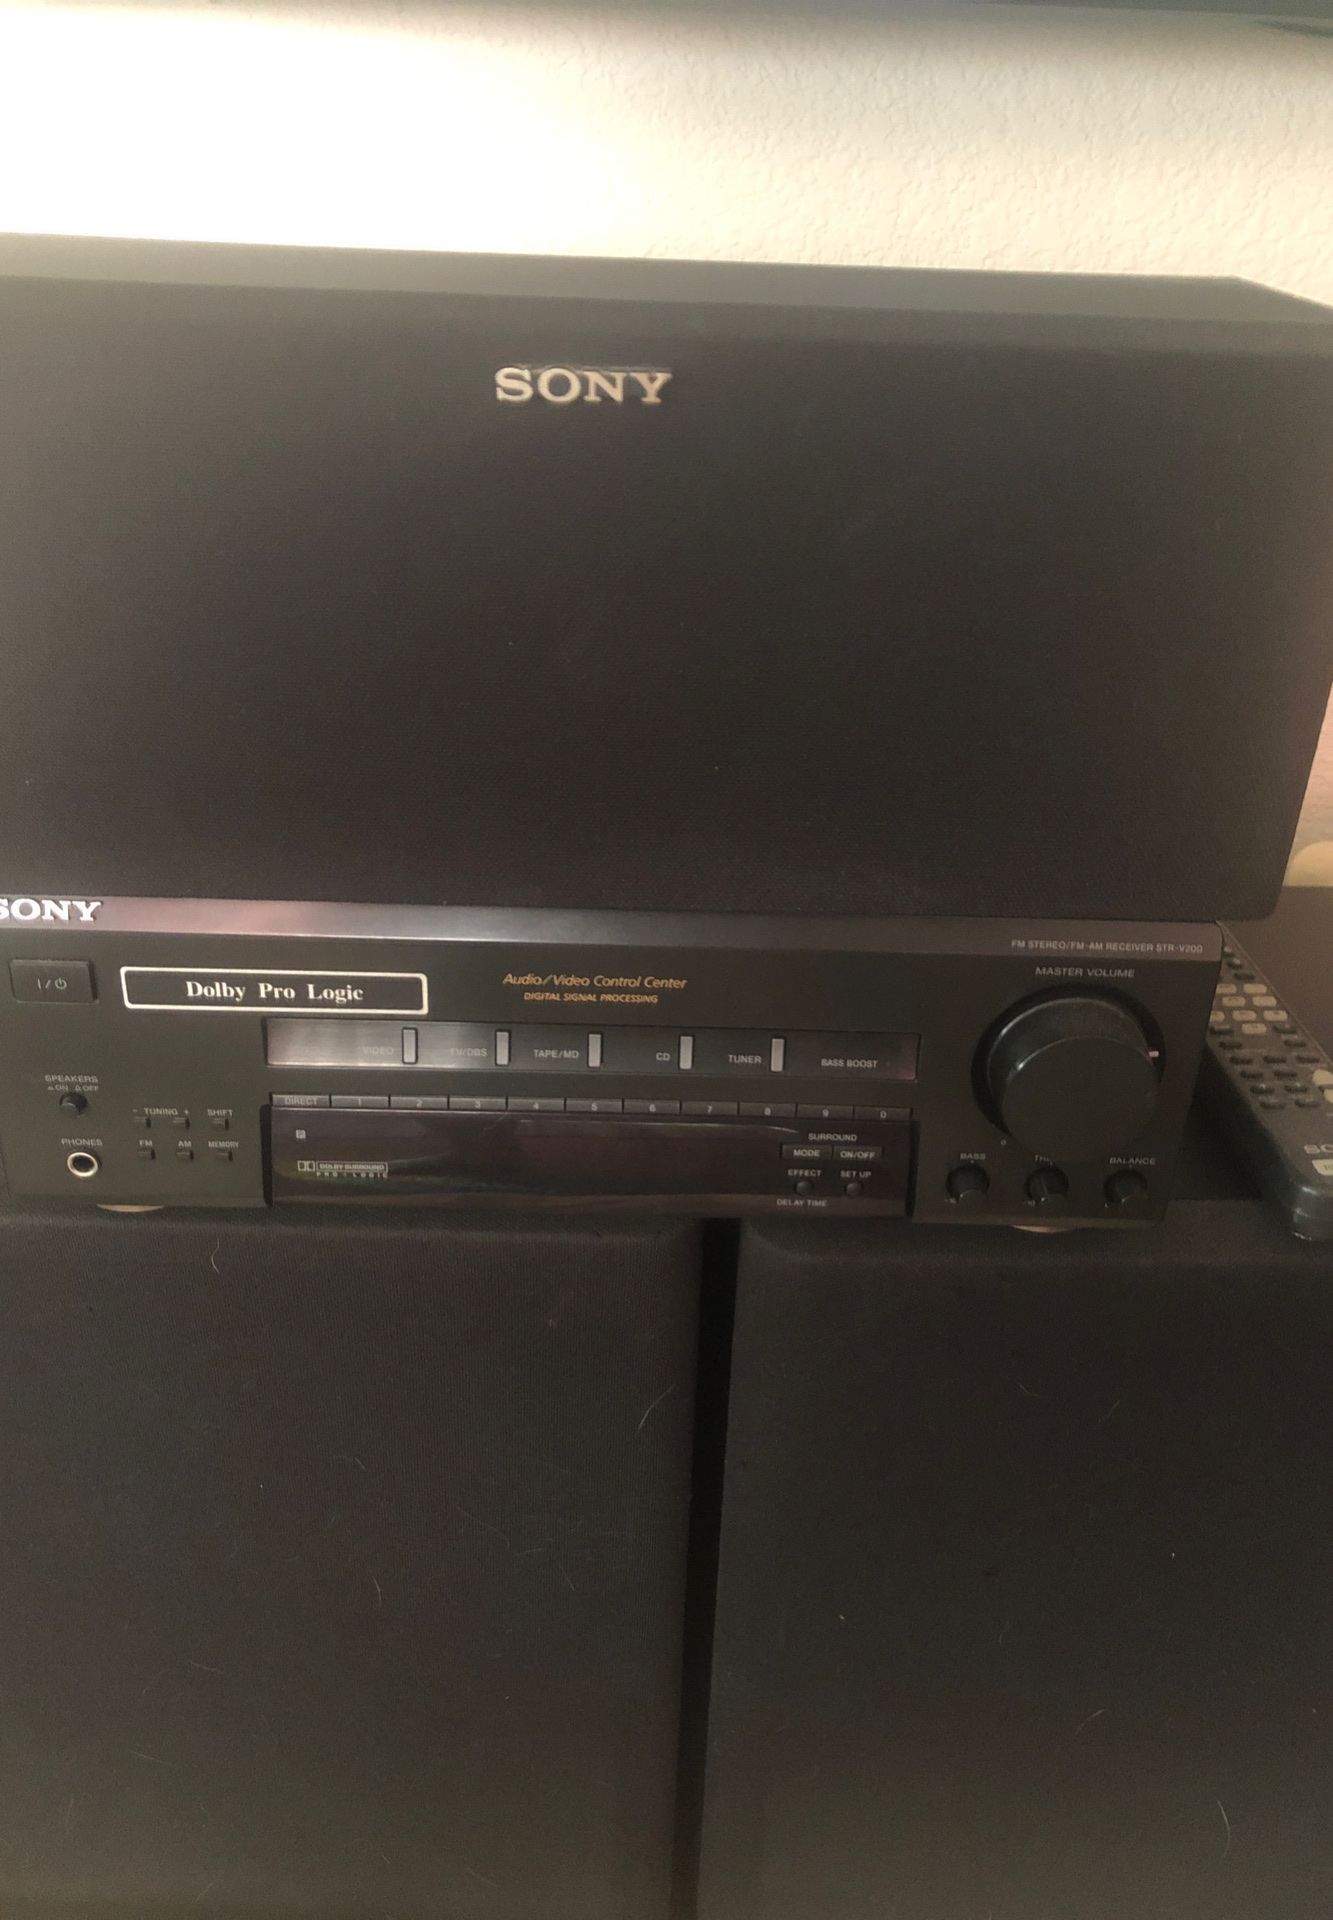 Sony Dolby Pro Logic Surround Sound System with 5 Speakers and remote